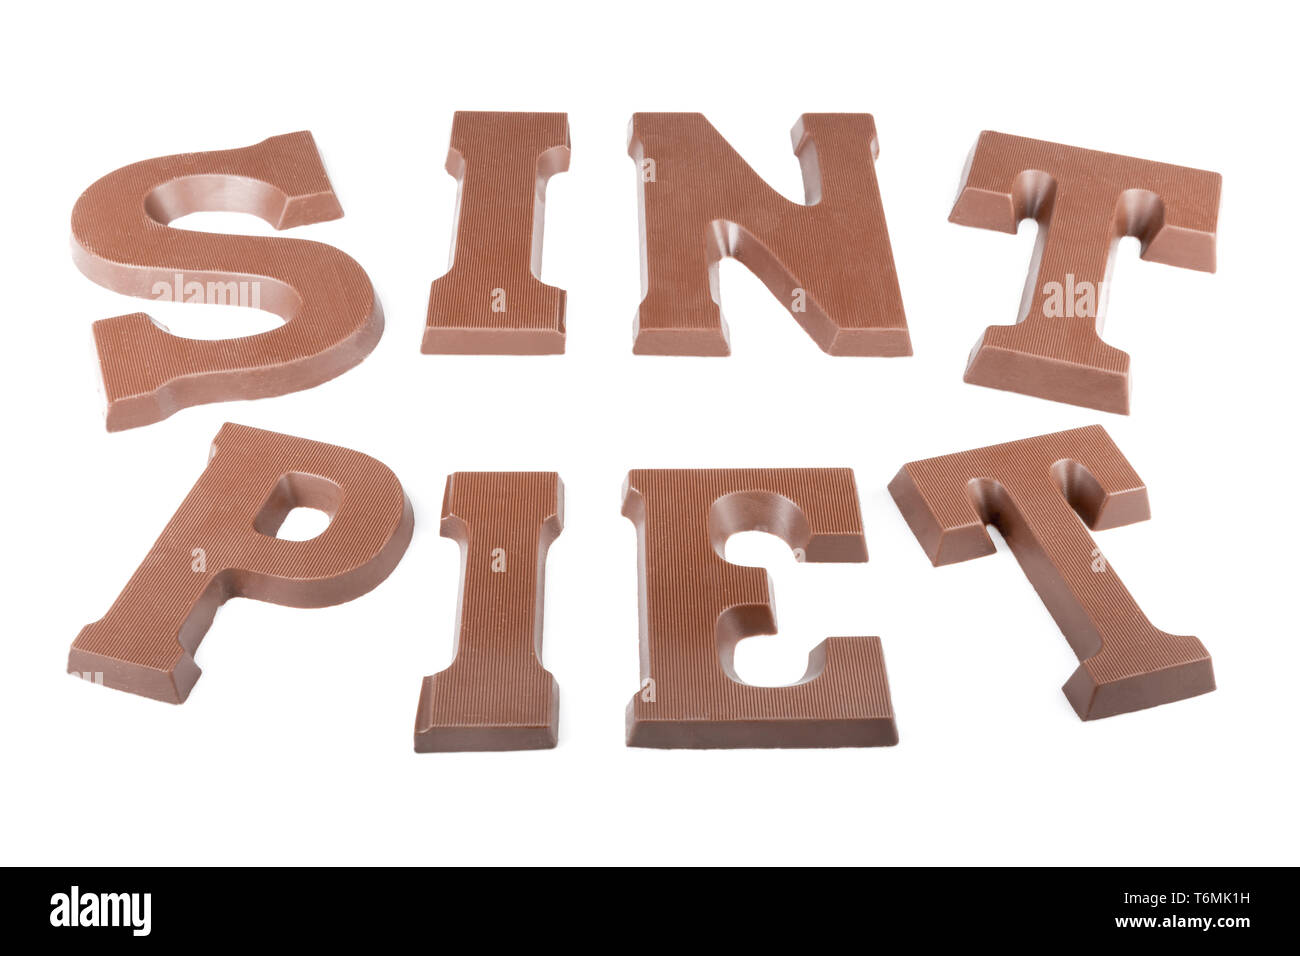 Chocolate letters making the word 'Sint'  and Piet' Stock Photo